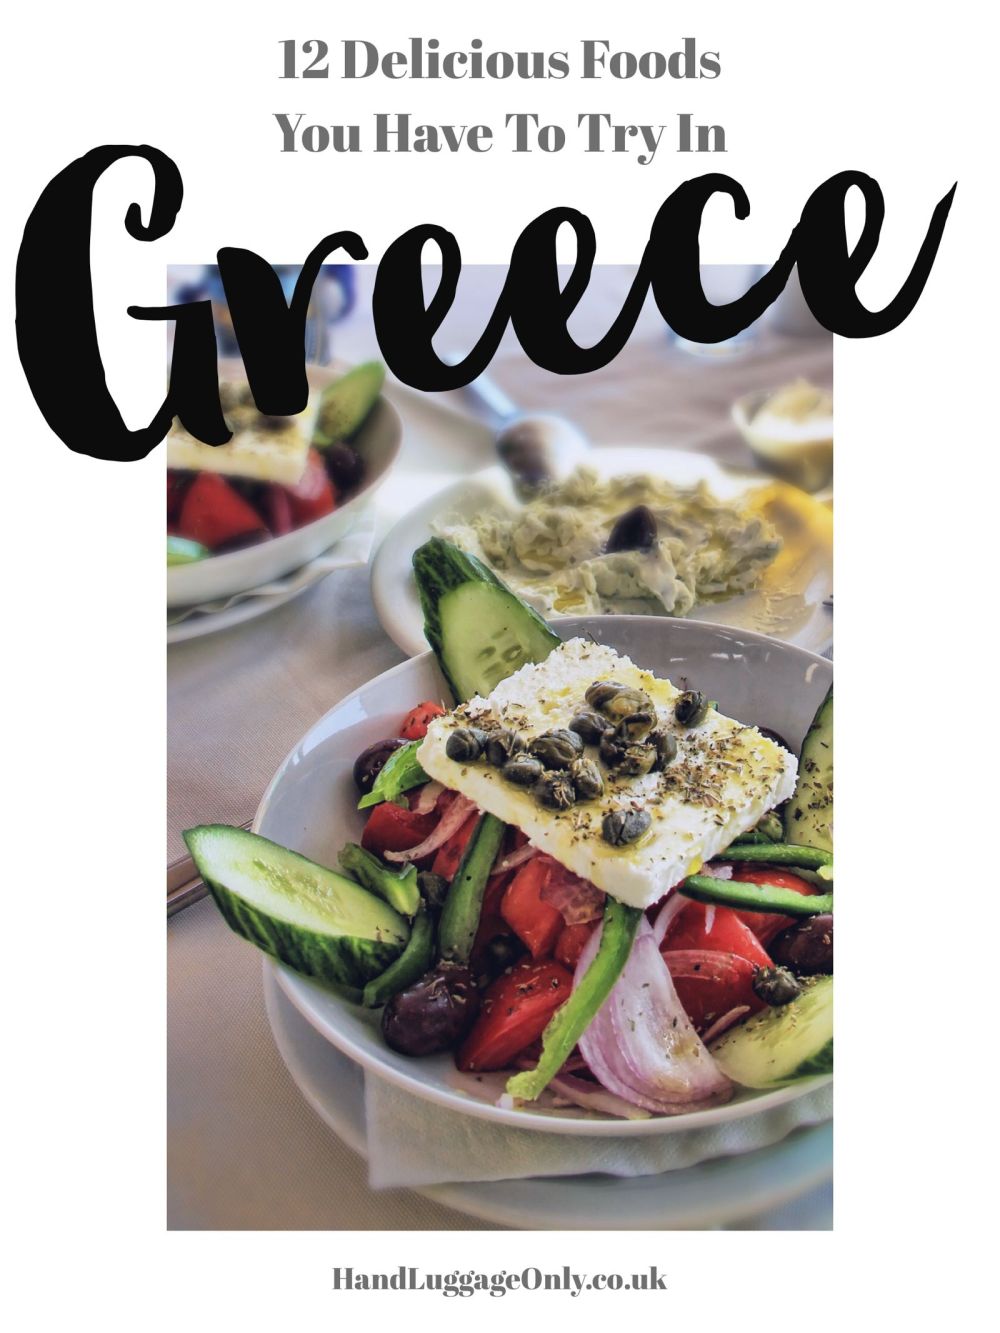 12 Delicious Foods You Have To Eat In Greece (14)